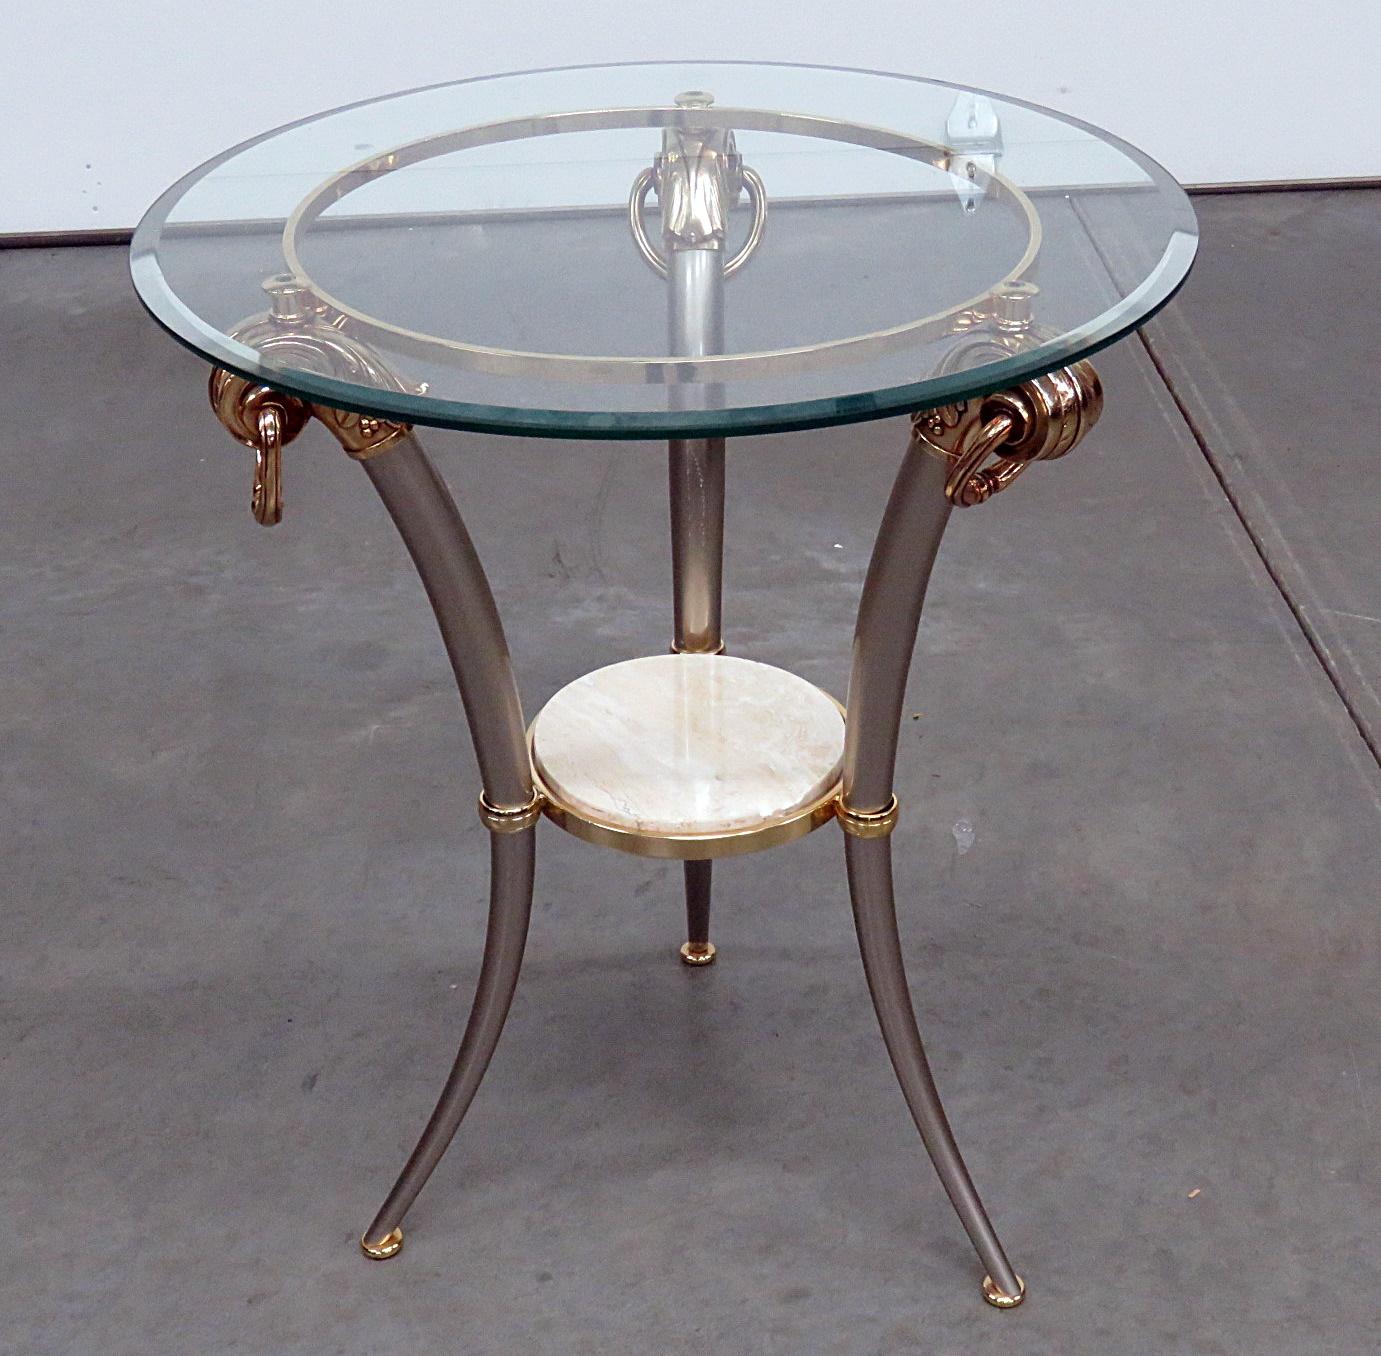 Regency style glass top side table with beveled glass on top, a marble insert on the bottom, and brass accents.